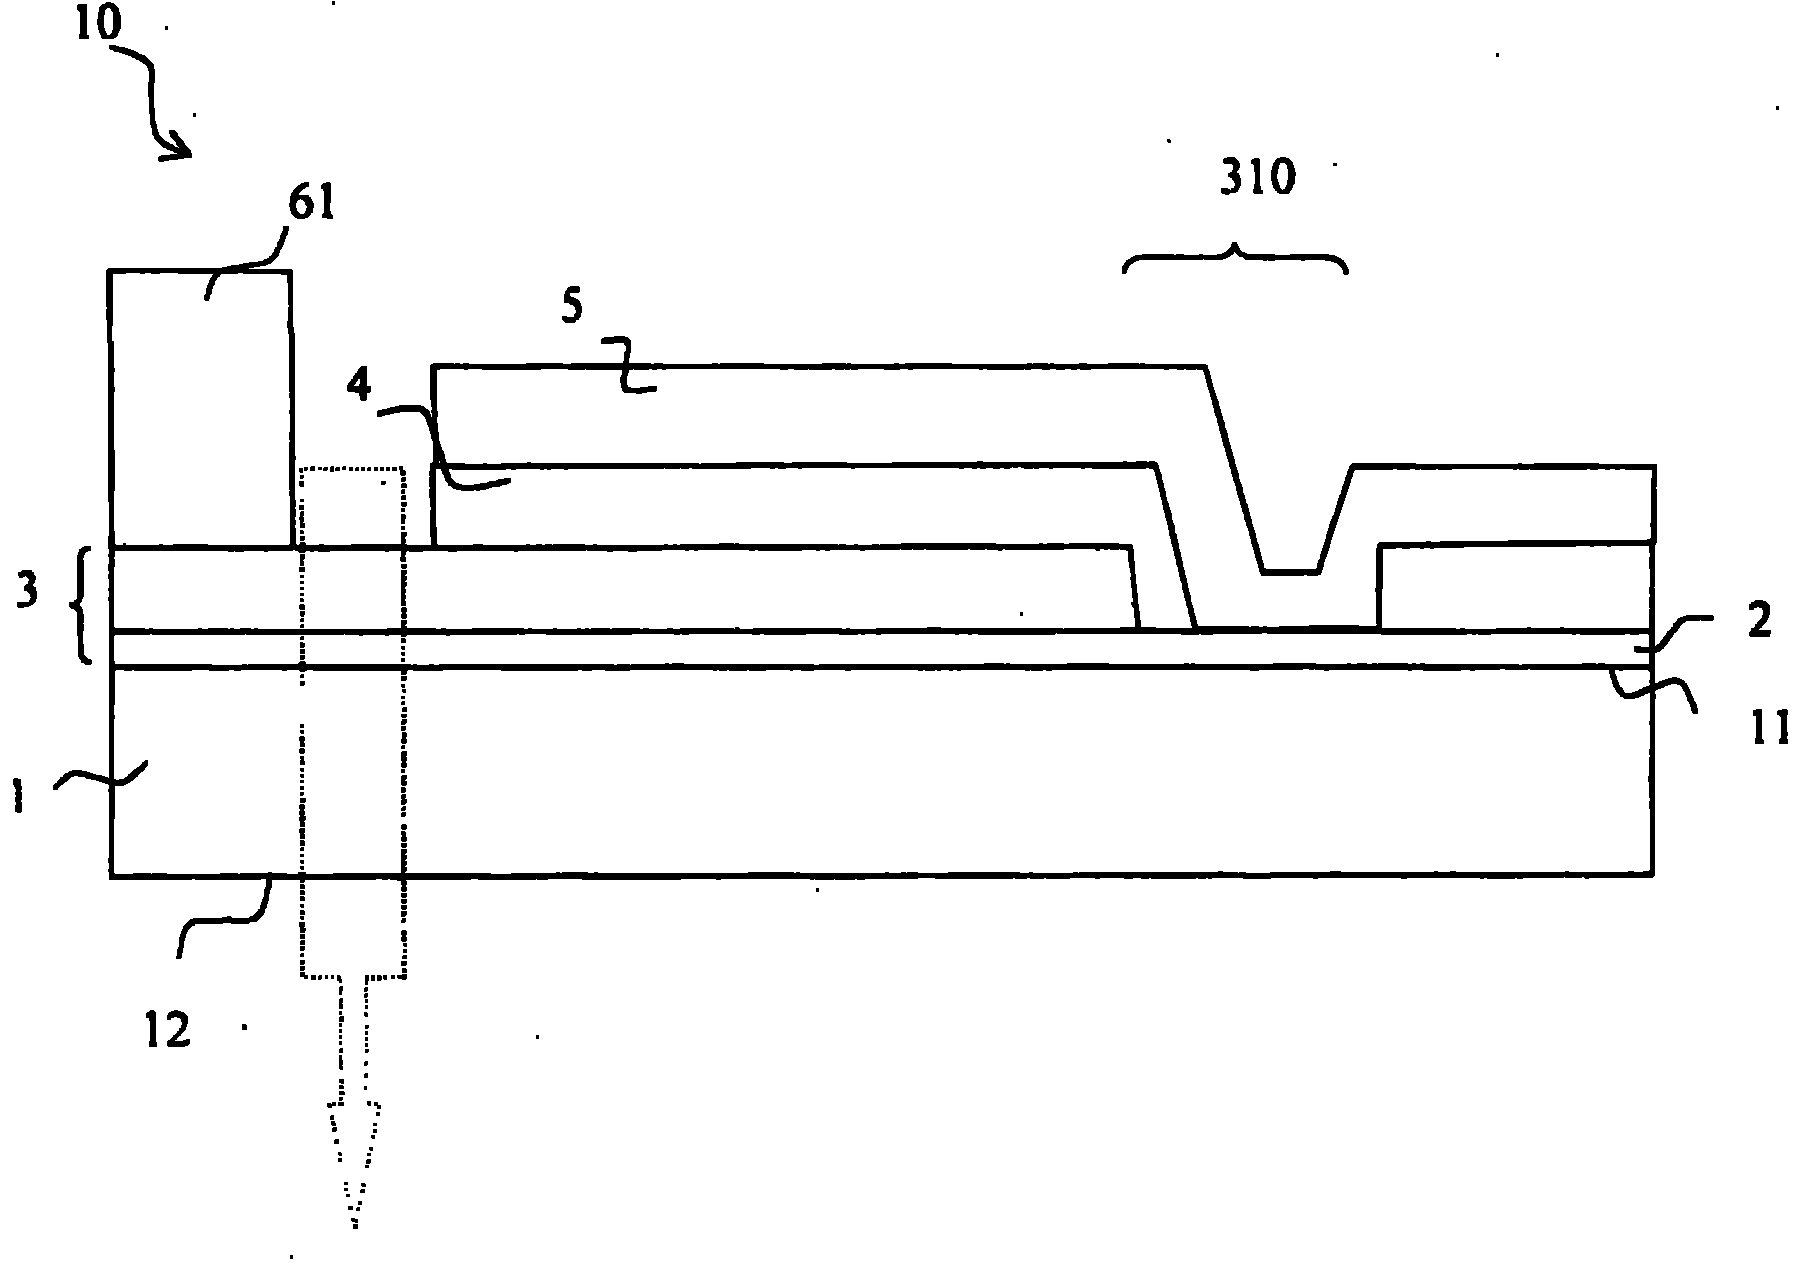 Substrate for an organic light-emitting device, and organic light-emitting device incorporating it